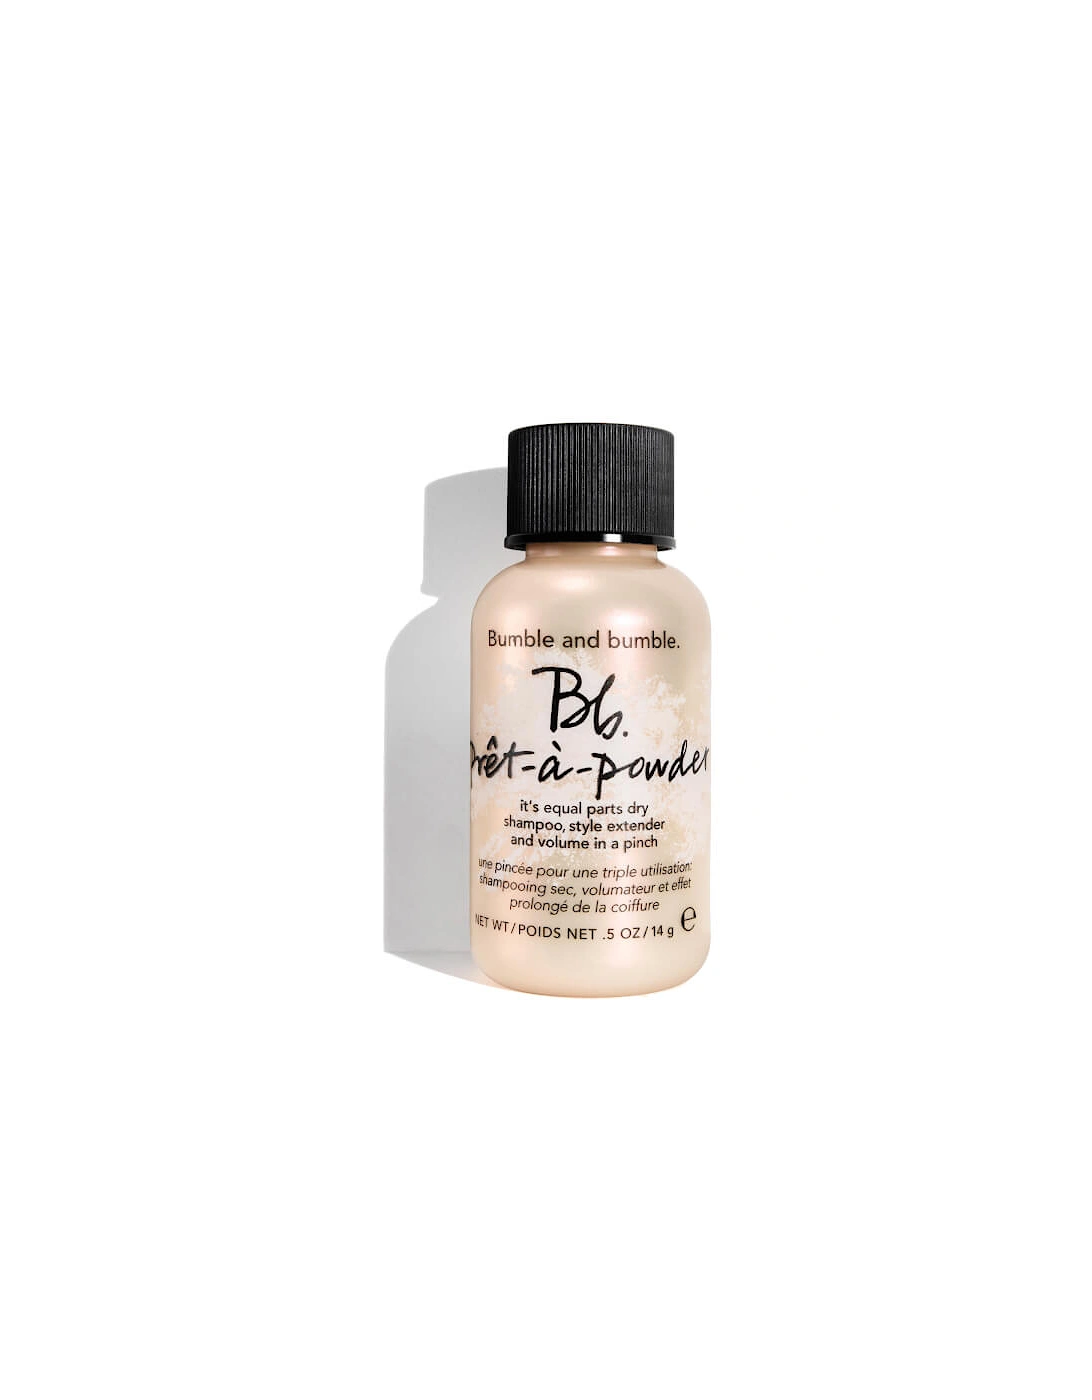 Bumble and bumble Pret a Powder 14g, 2 of 1